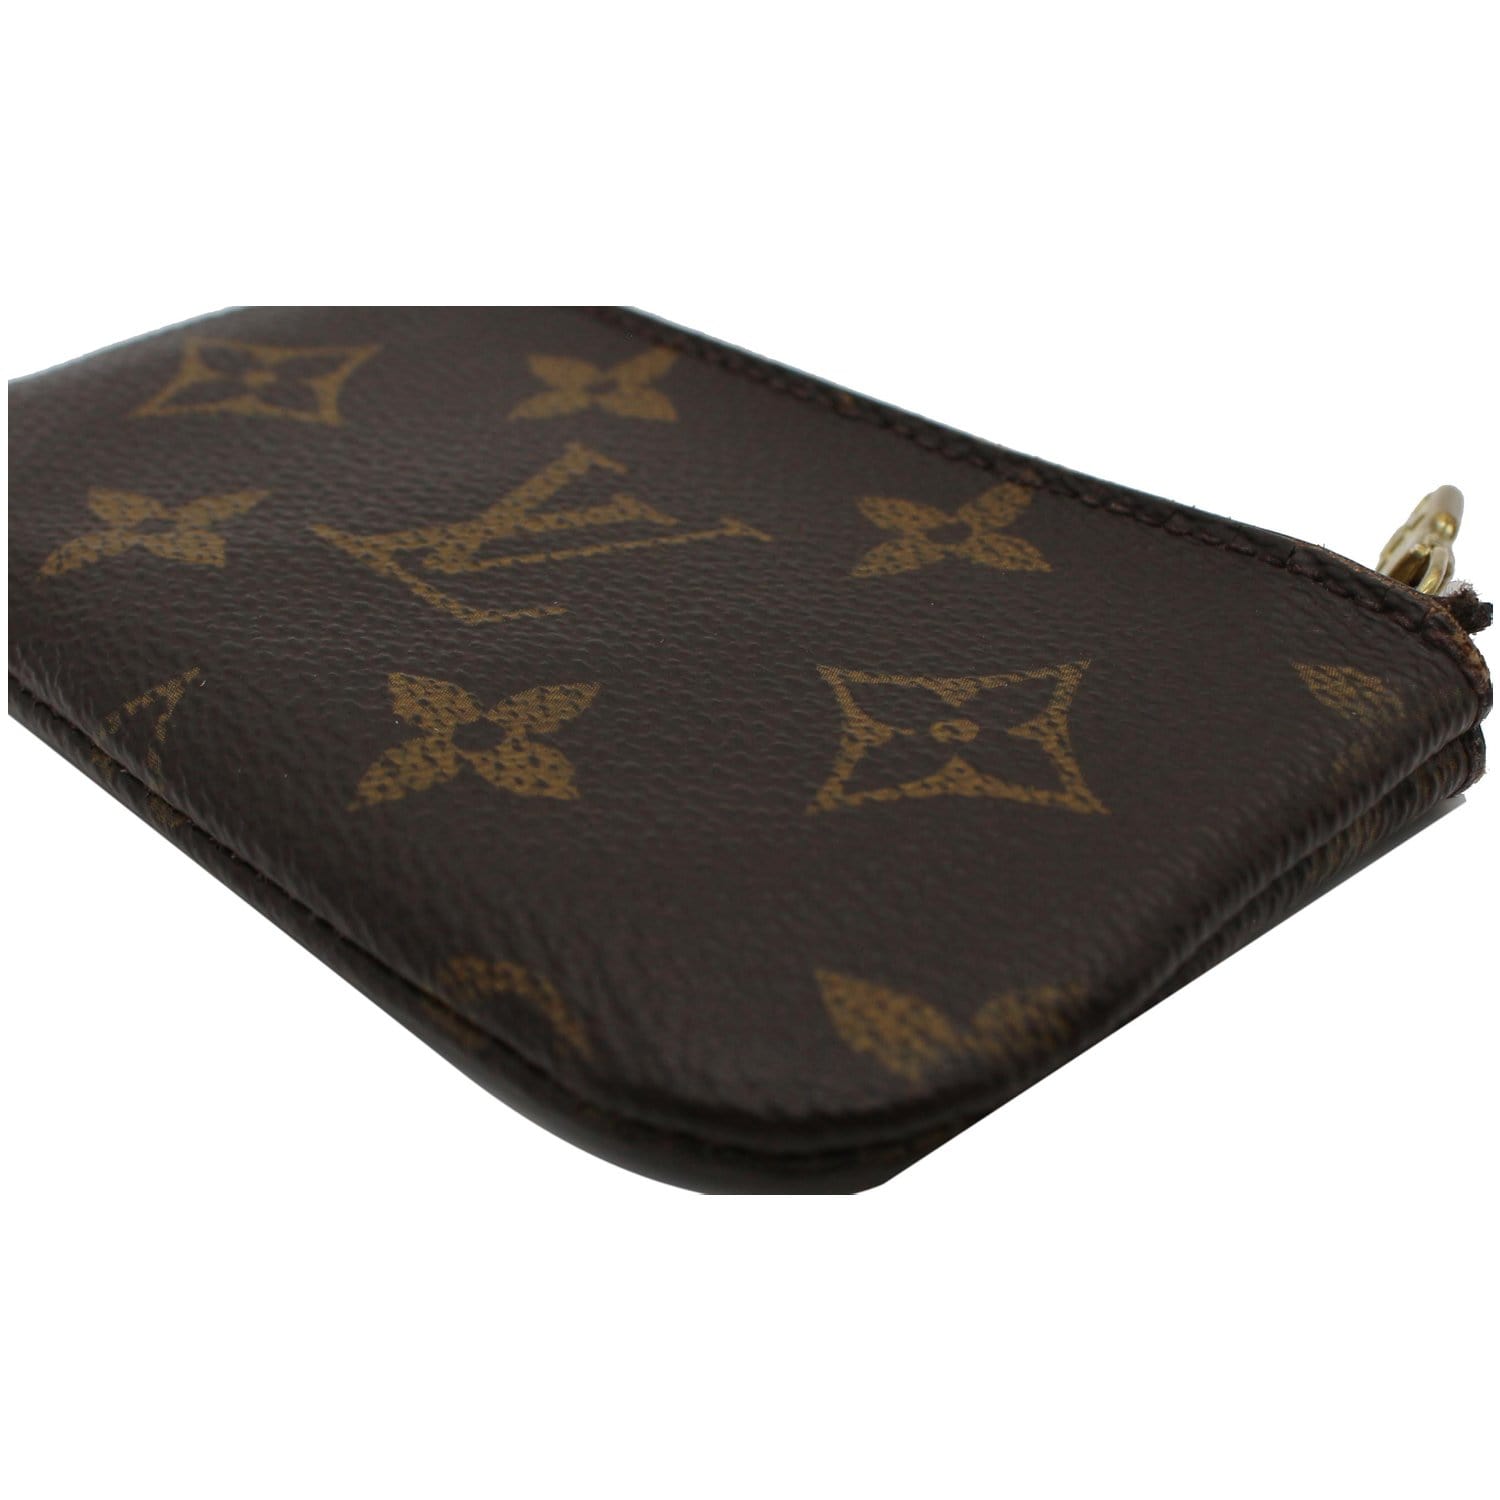 Shop Louis Vuitton MONOGRAM Leather Small Wallet Coin Cases by